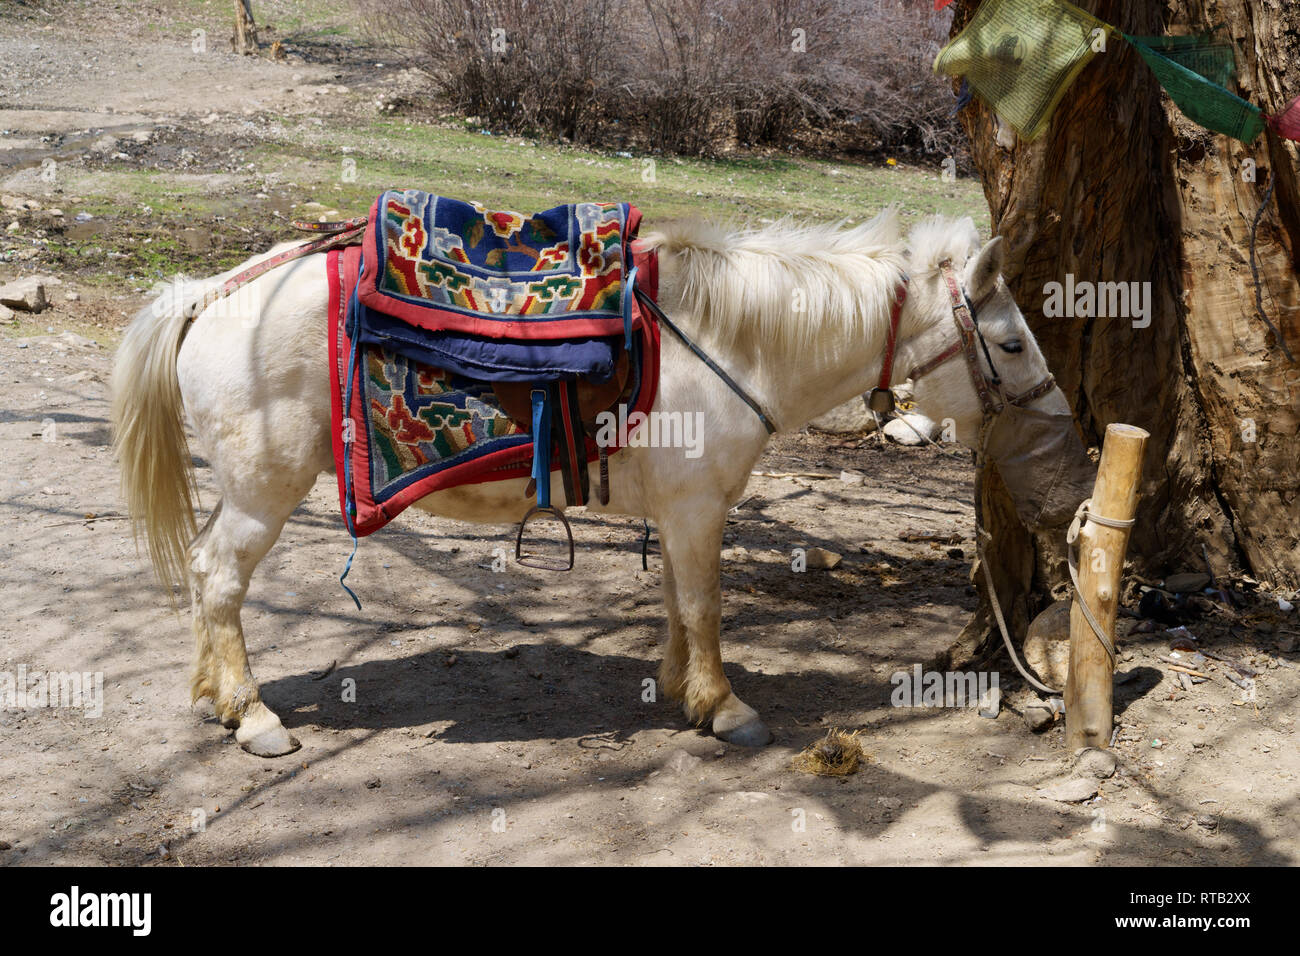 Pack horse feeding from a nose bag, Upper Mustang region, Nepal. Stock Photo